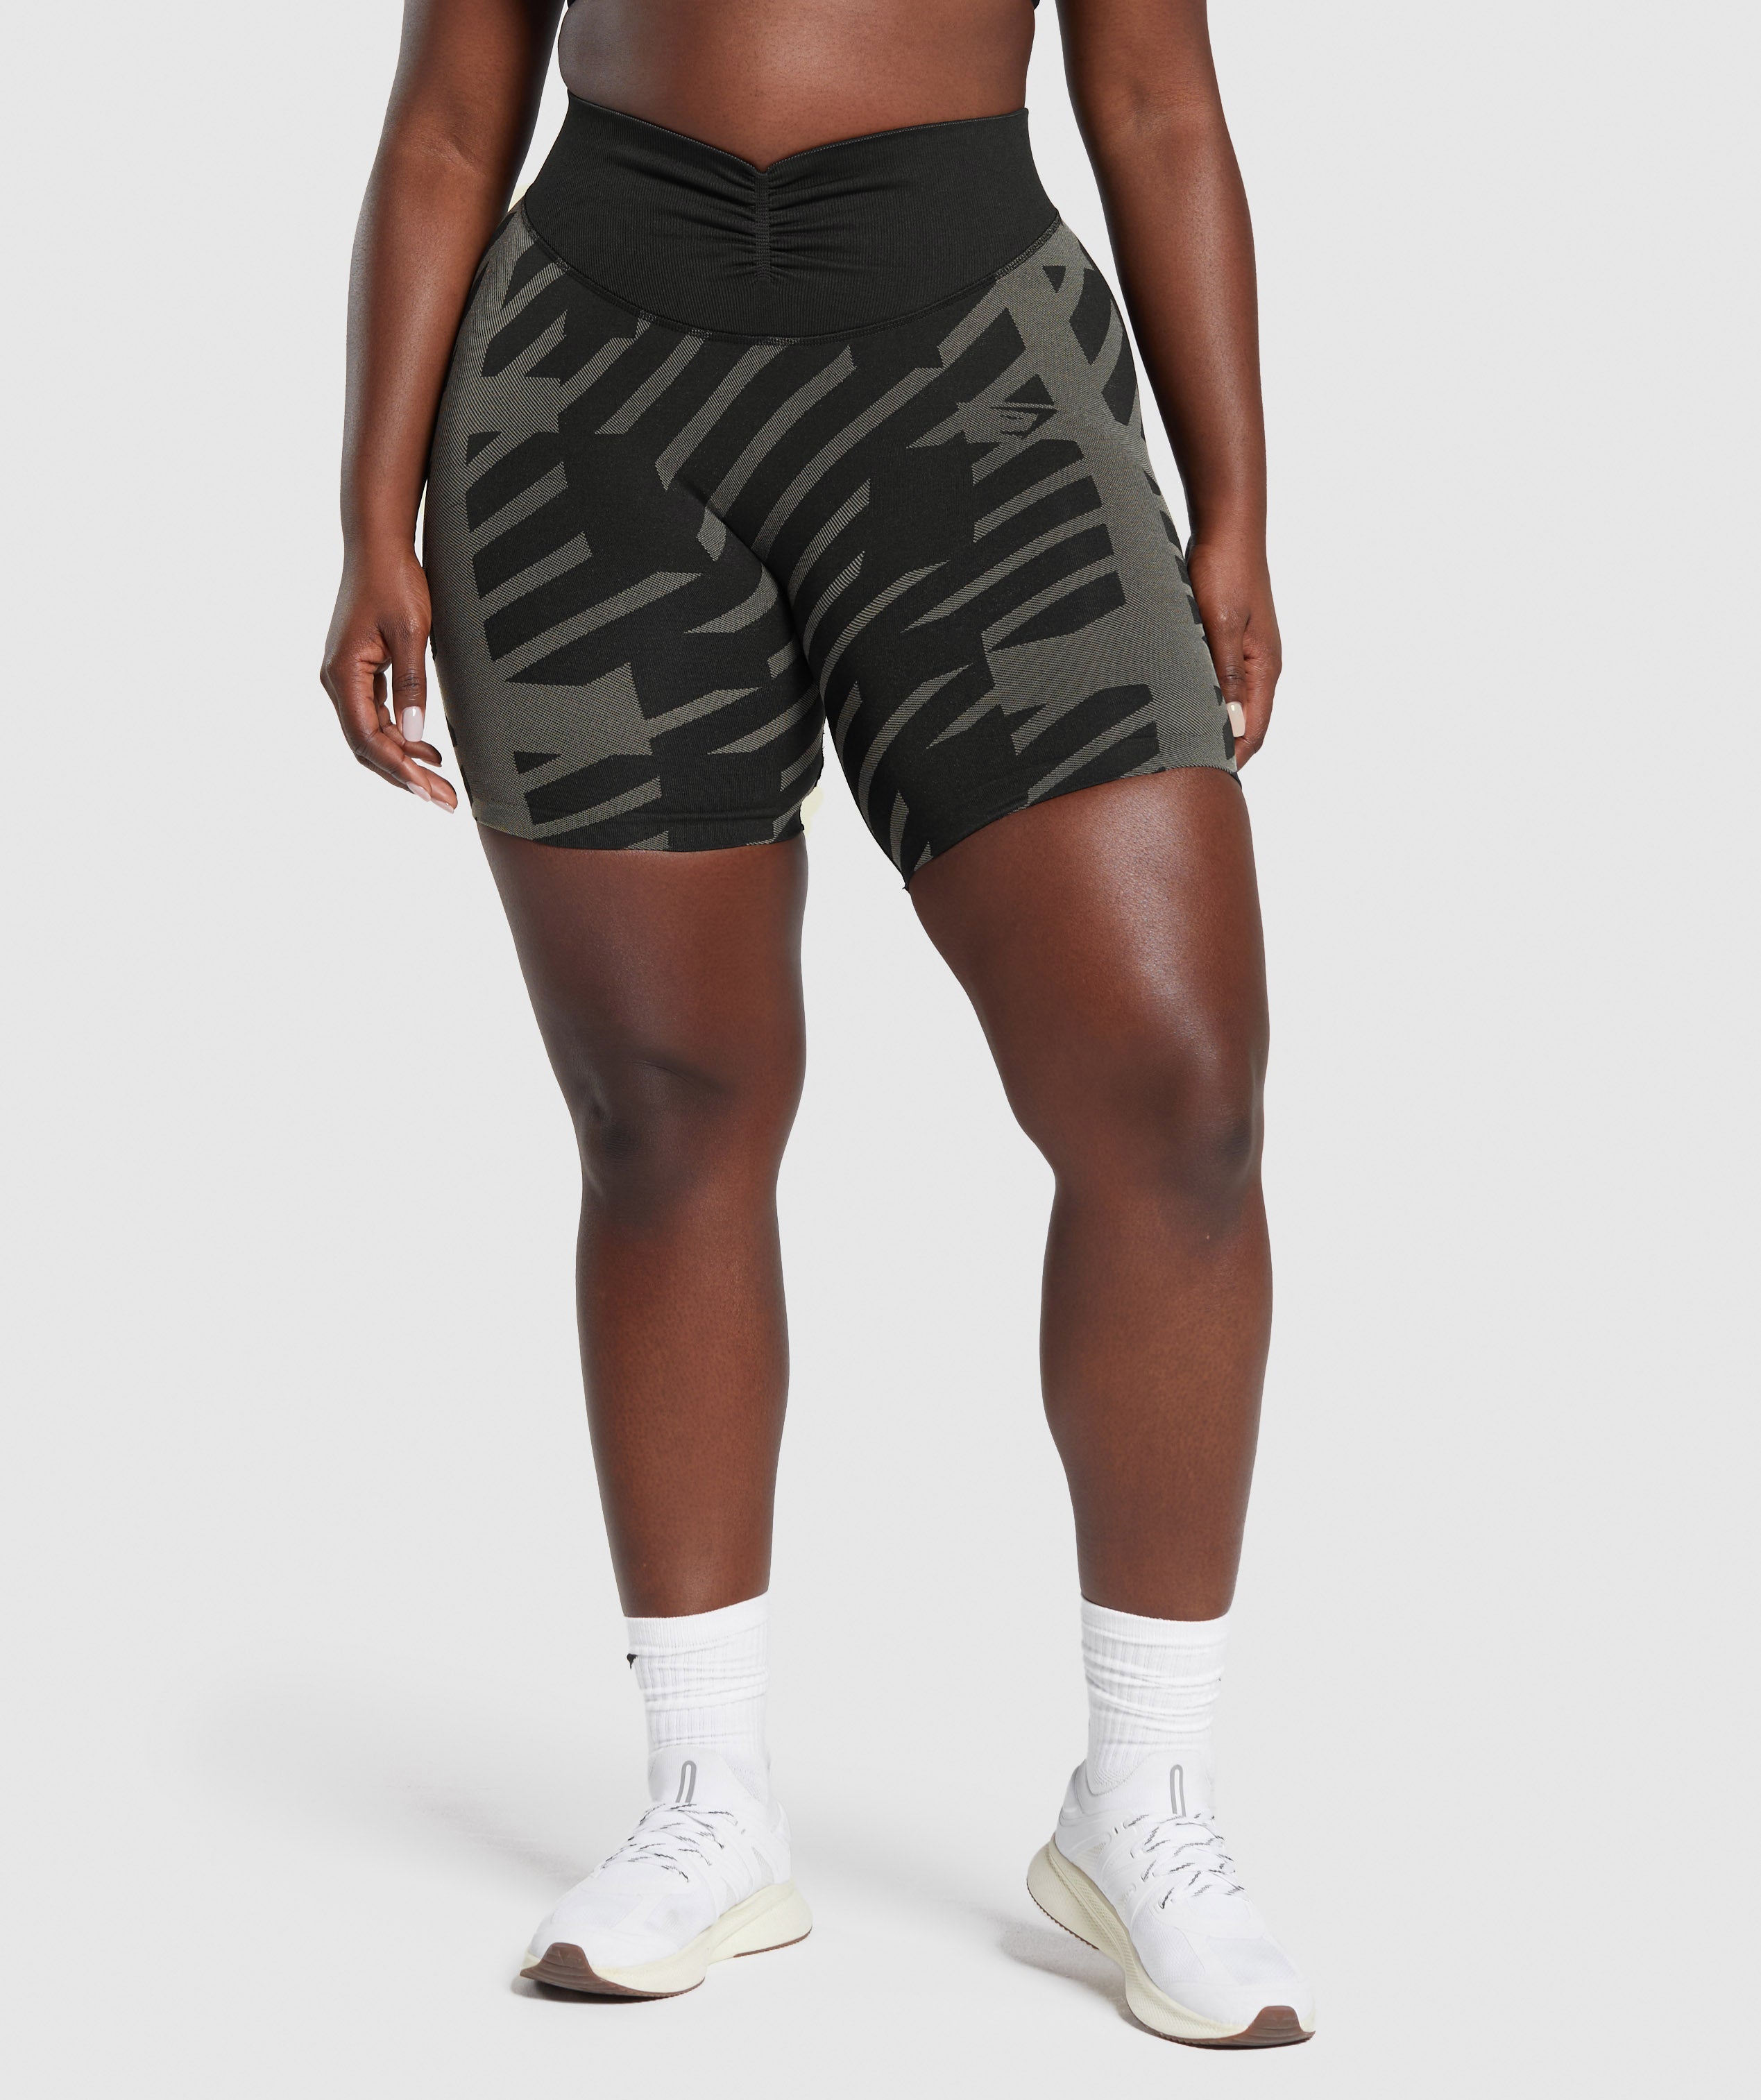 Apex Limit Seamless Ruched Shorts in Black/Washed Stone Brown - view 3